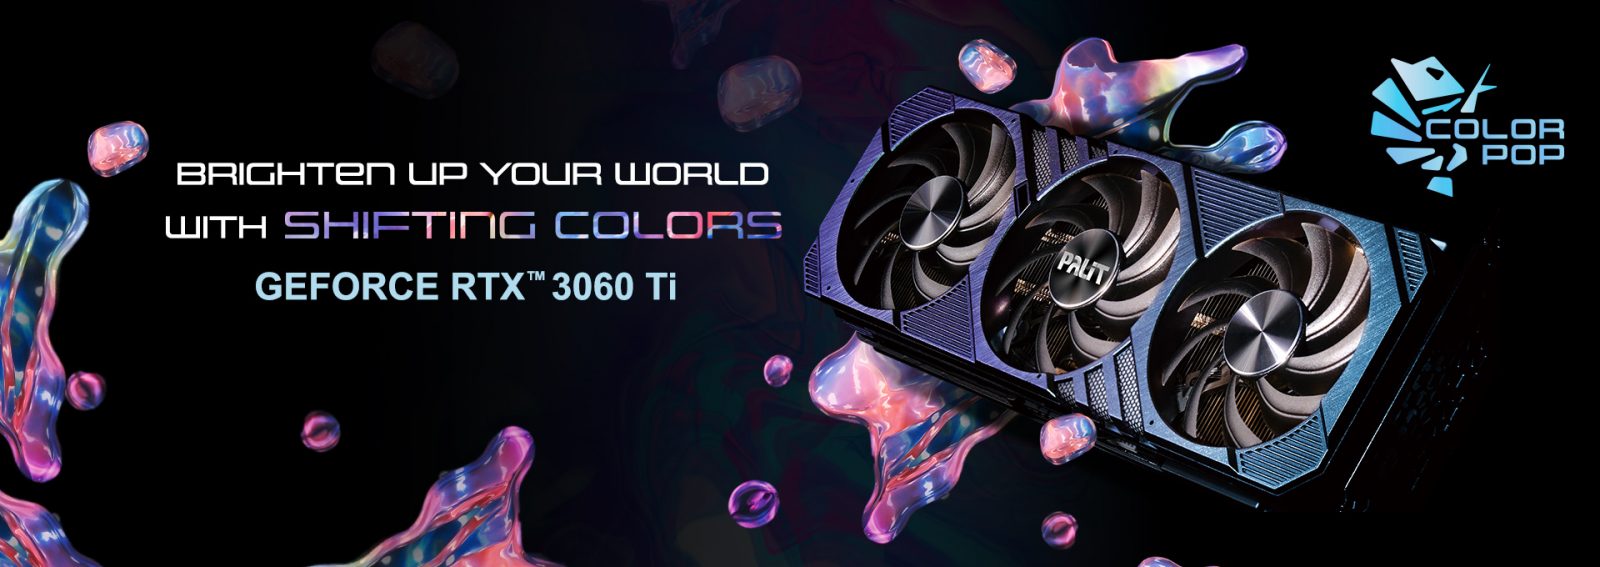 PALIT introduces GeForce RTX  Ti ColorPOP graphics card with